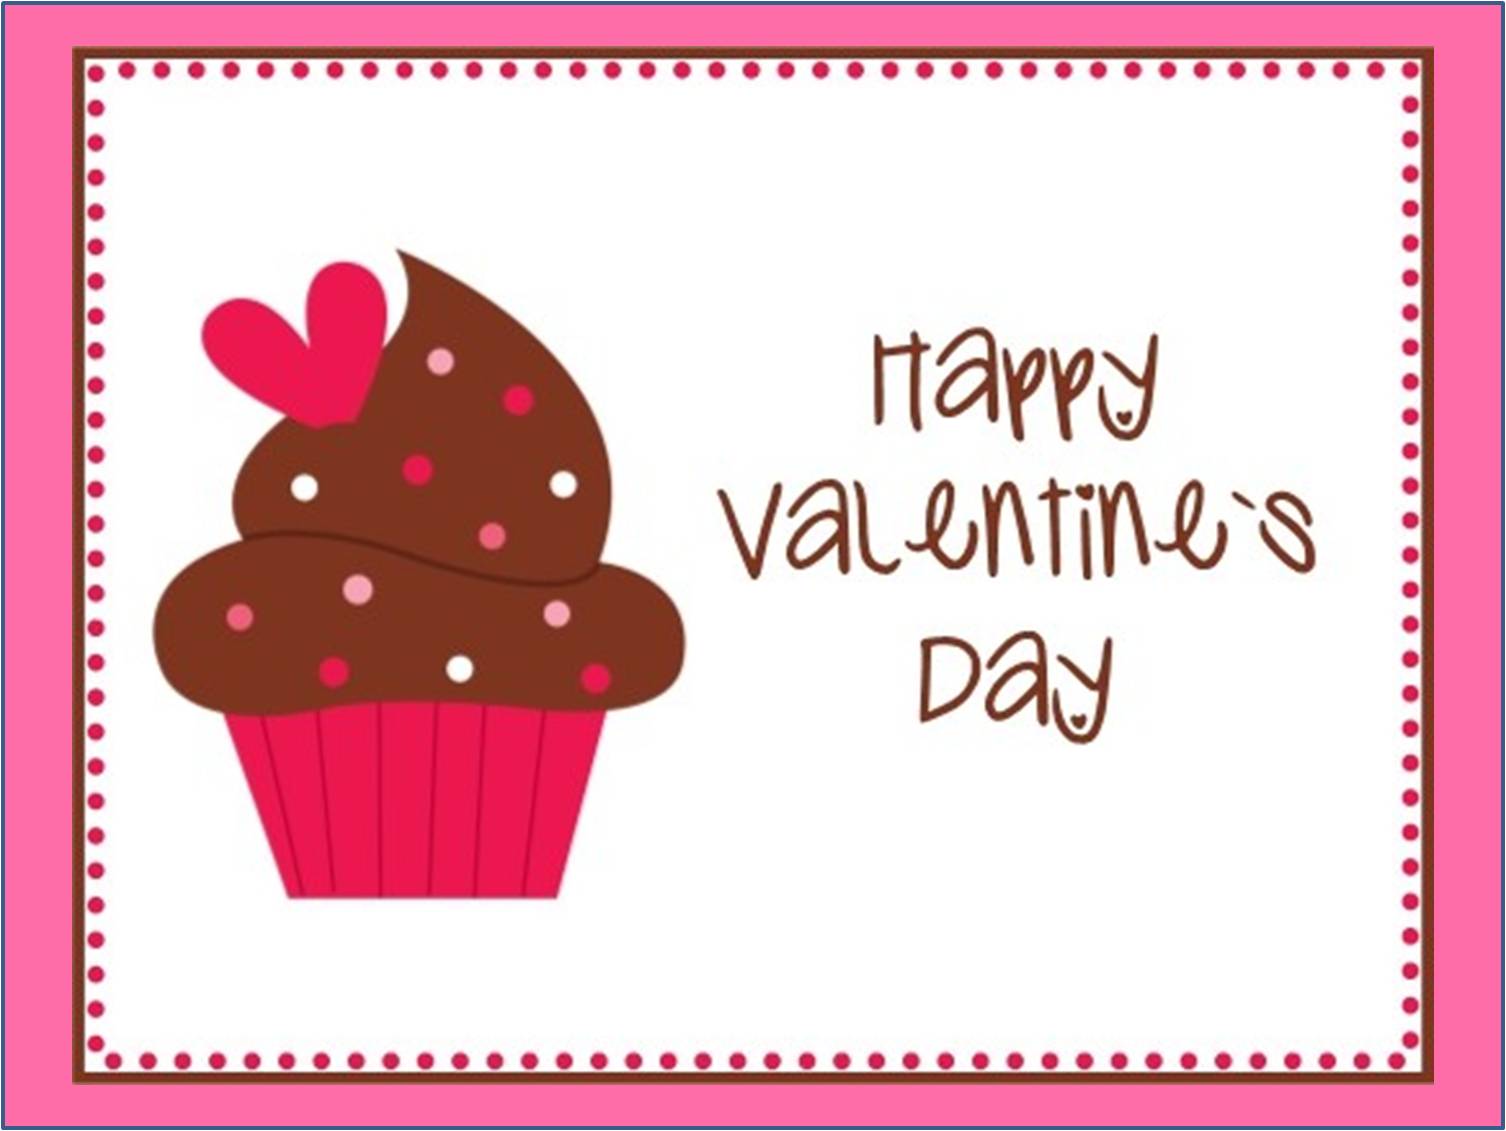 clipart of valentine day - photo #5